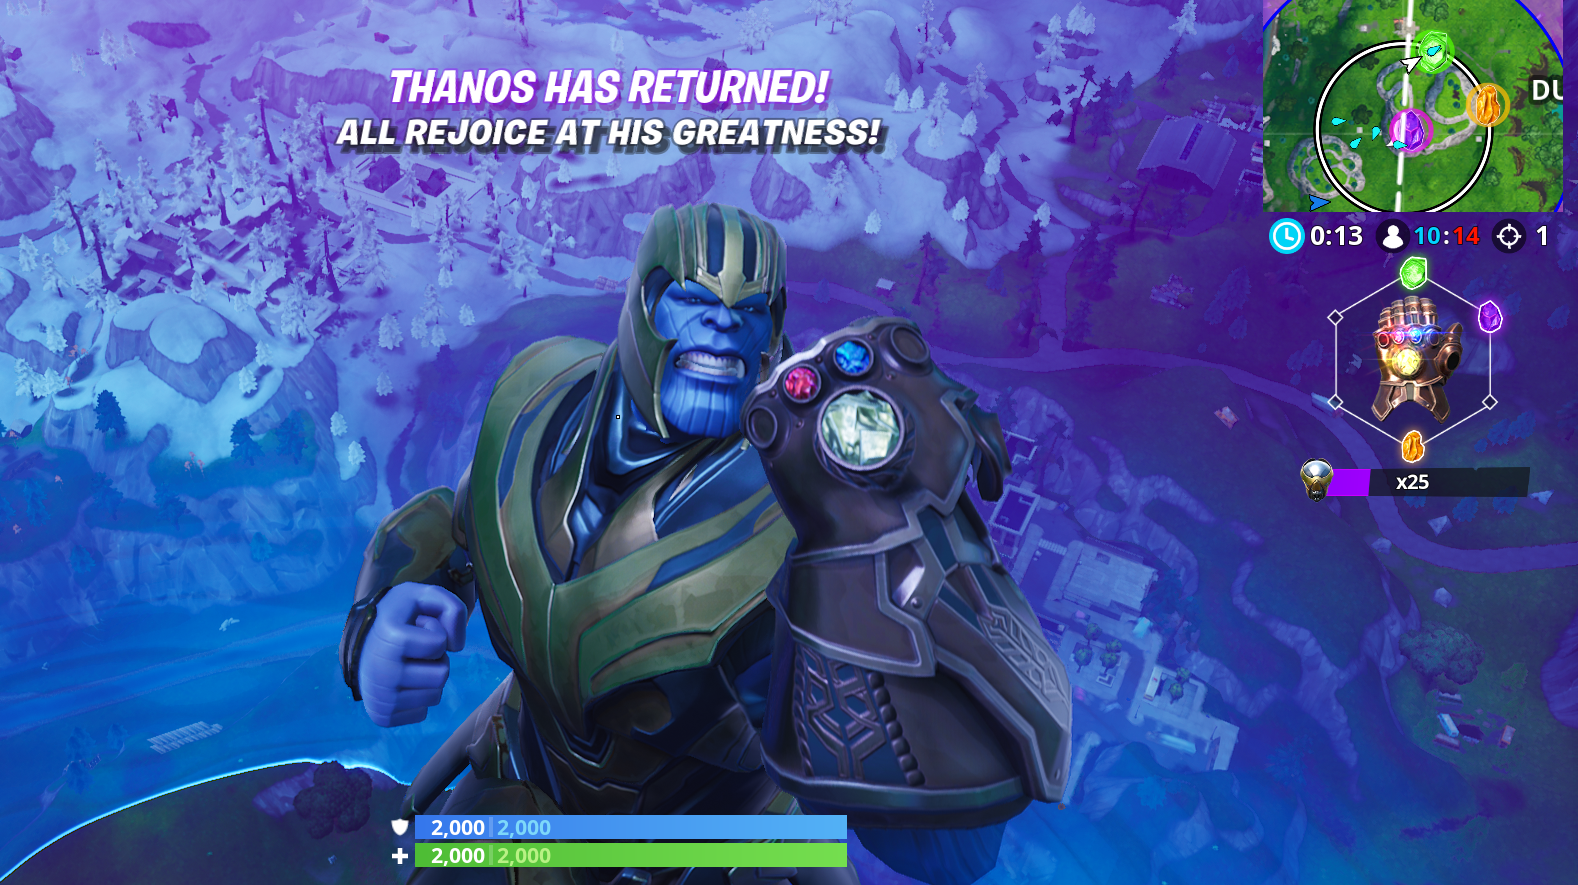 Fortnite S Endgame Mode Is Fun Whether You Re Wielding Avengers - even if you re not a marvel fan i m not fortnite s avengers tie in fortnite endgame is a lot of fun it continues the game s recent trend of unique